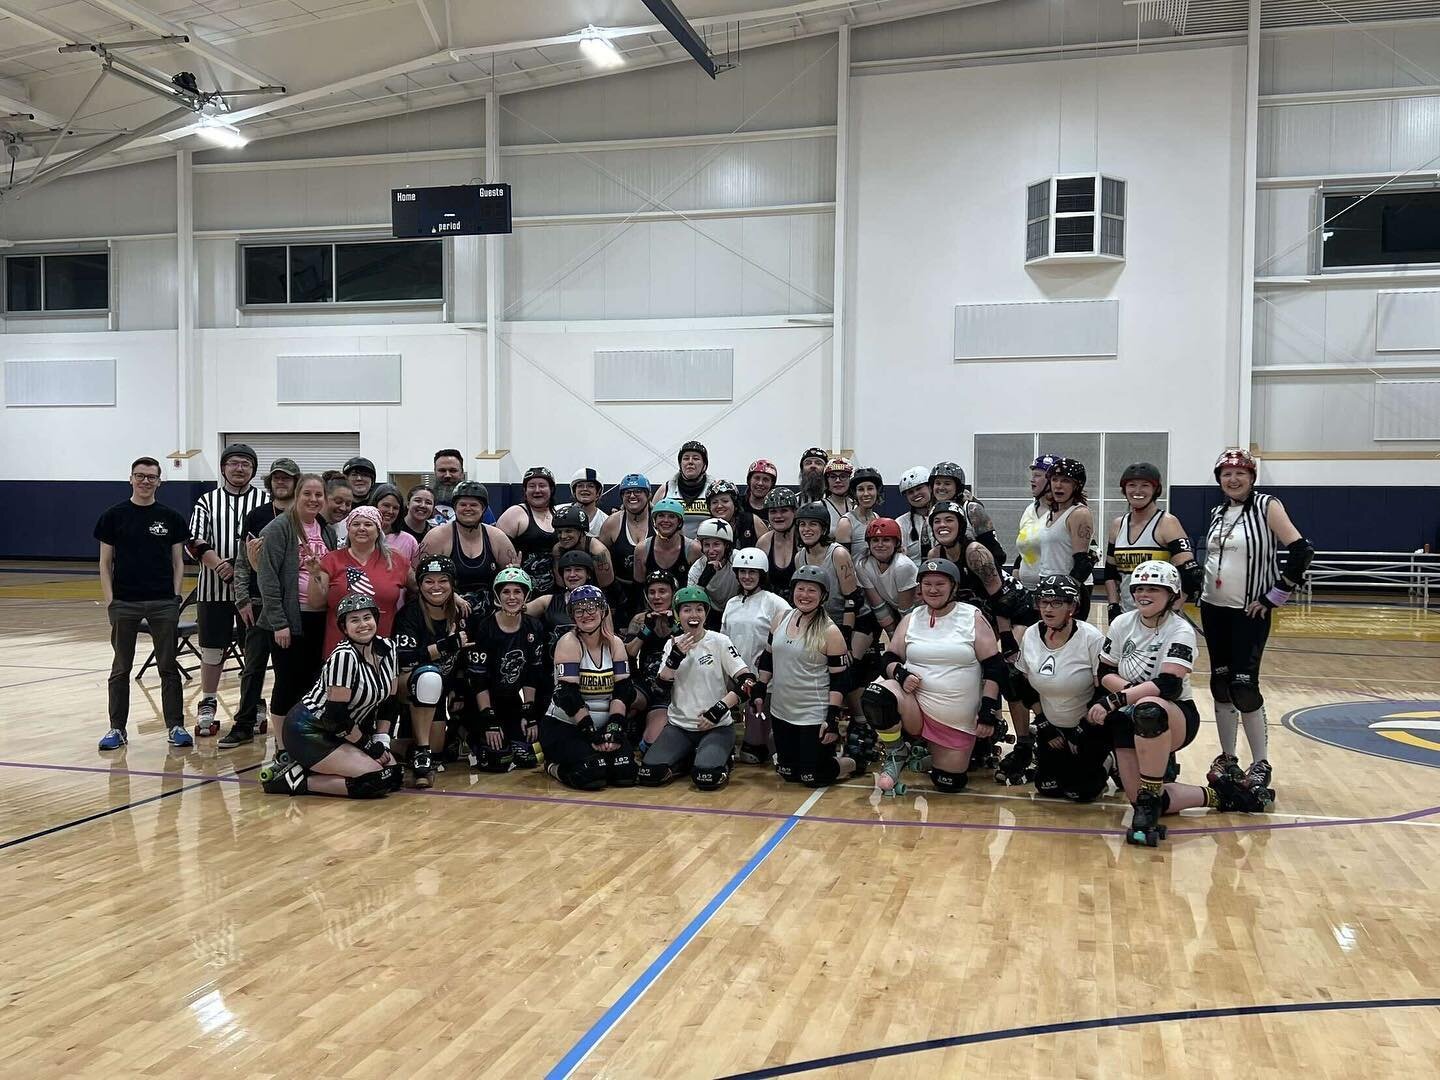 Scrimmage with @ohiovalleyrollerderby ! Thank you for having us !!